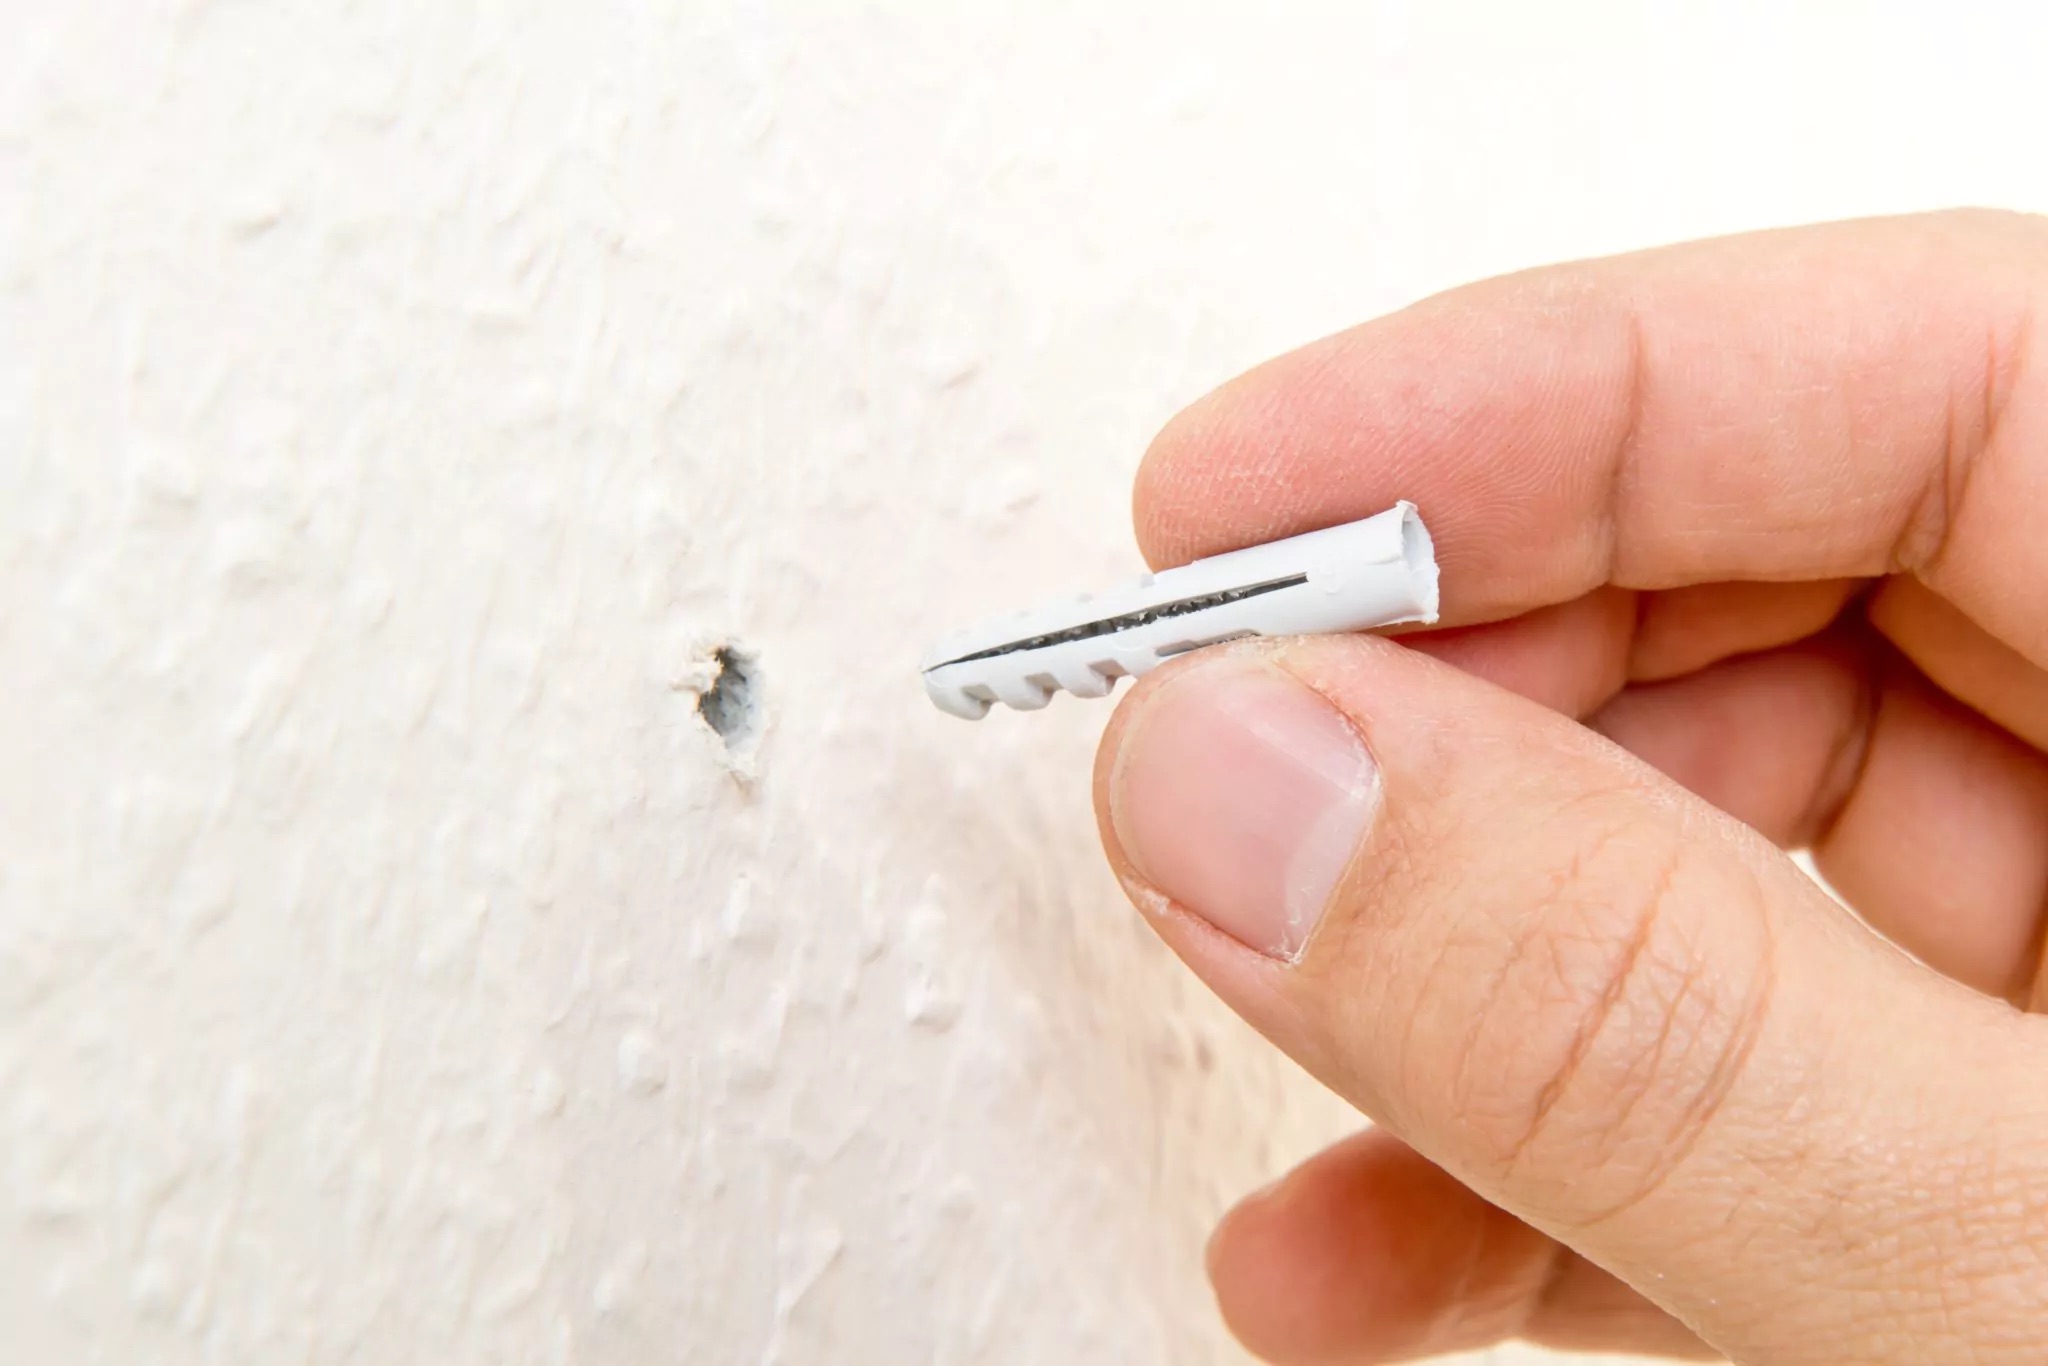 How To Use Drywall Anchors To Hang Your Favorite Decor